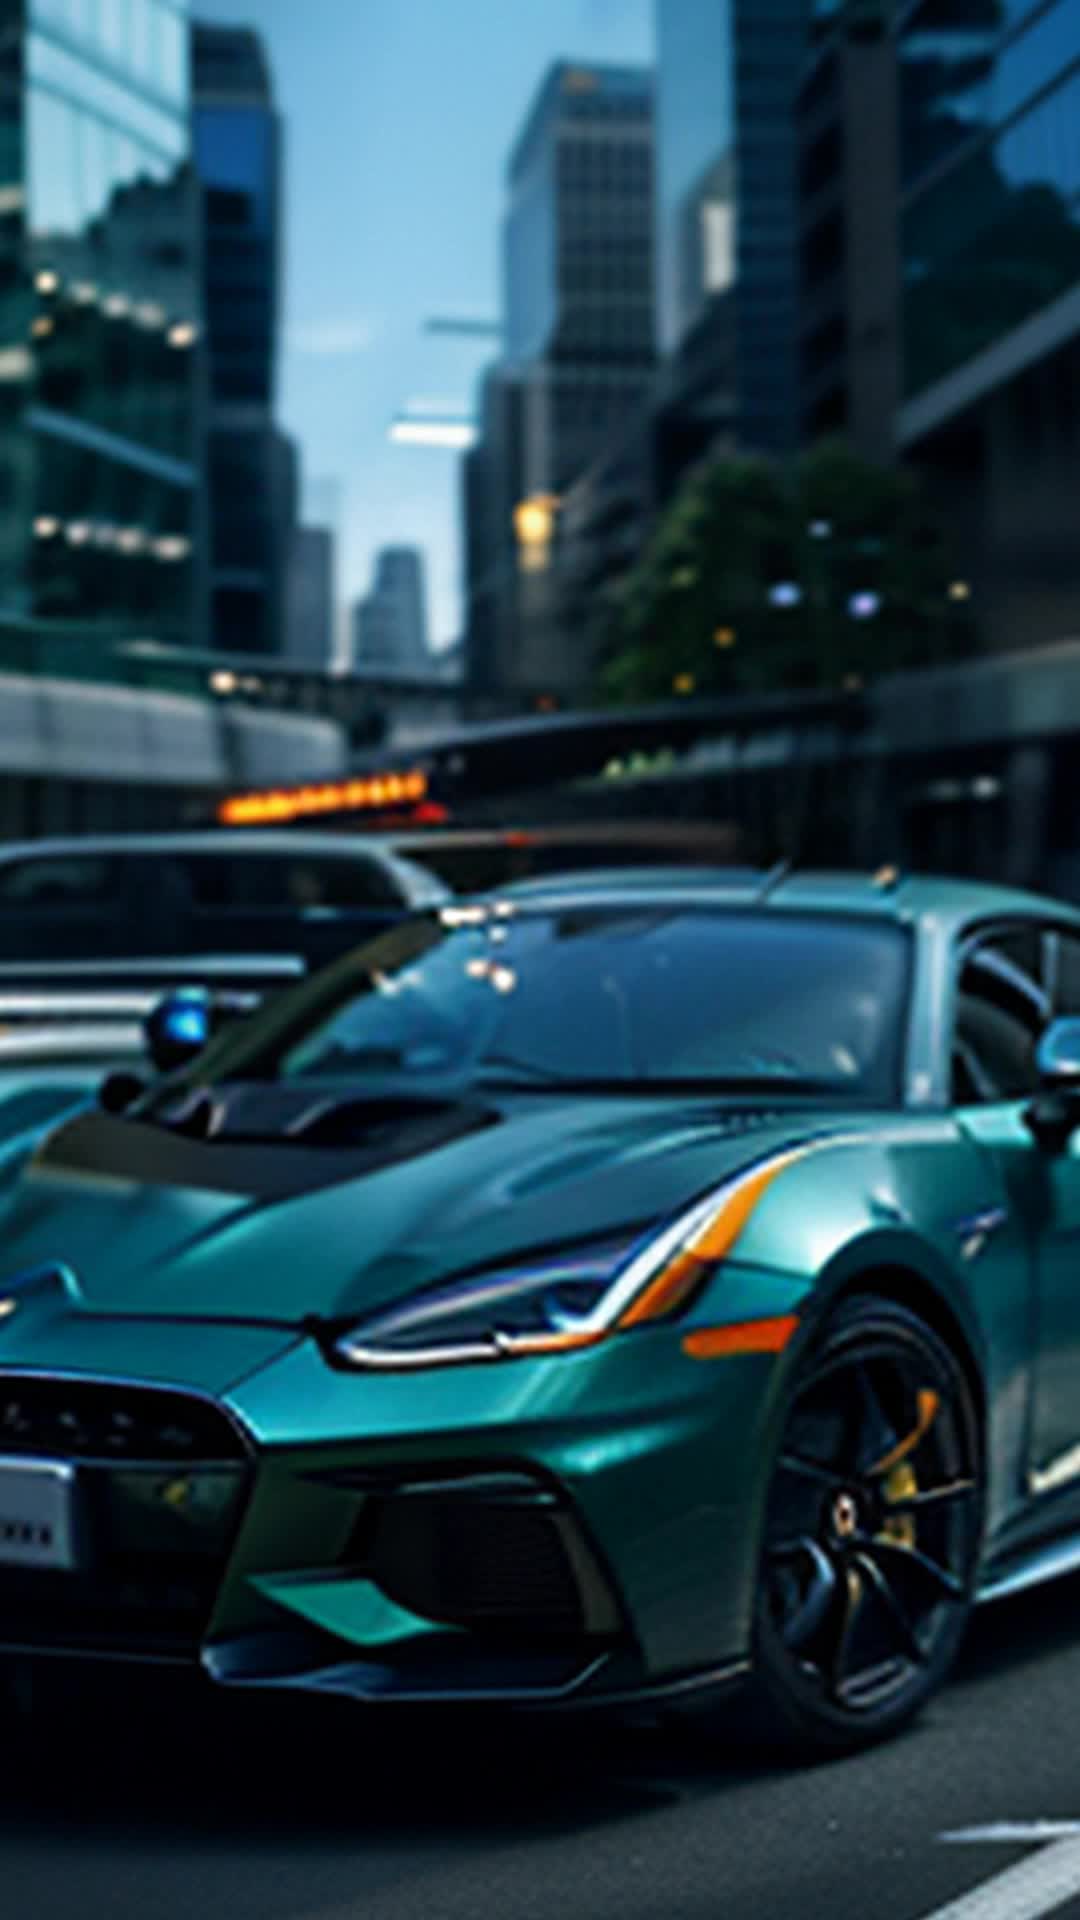 Jackson in sports car, billionaire, dodging through bustling city traffic, mind racing, swiftly weaving between skyscrapers, pulse surging, corporate rivals tailing, scent of betrayal, sharp city air